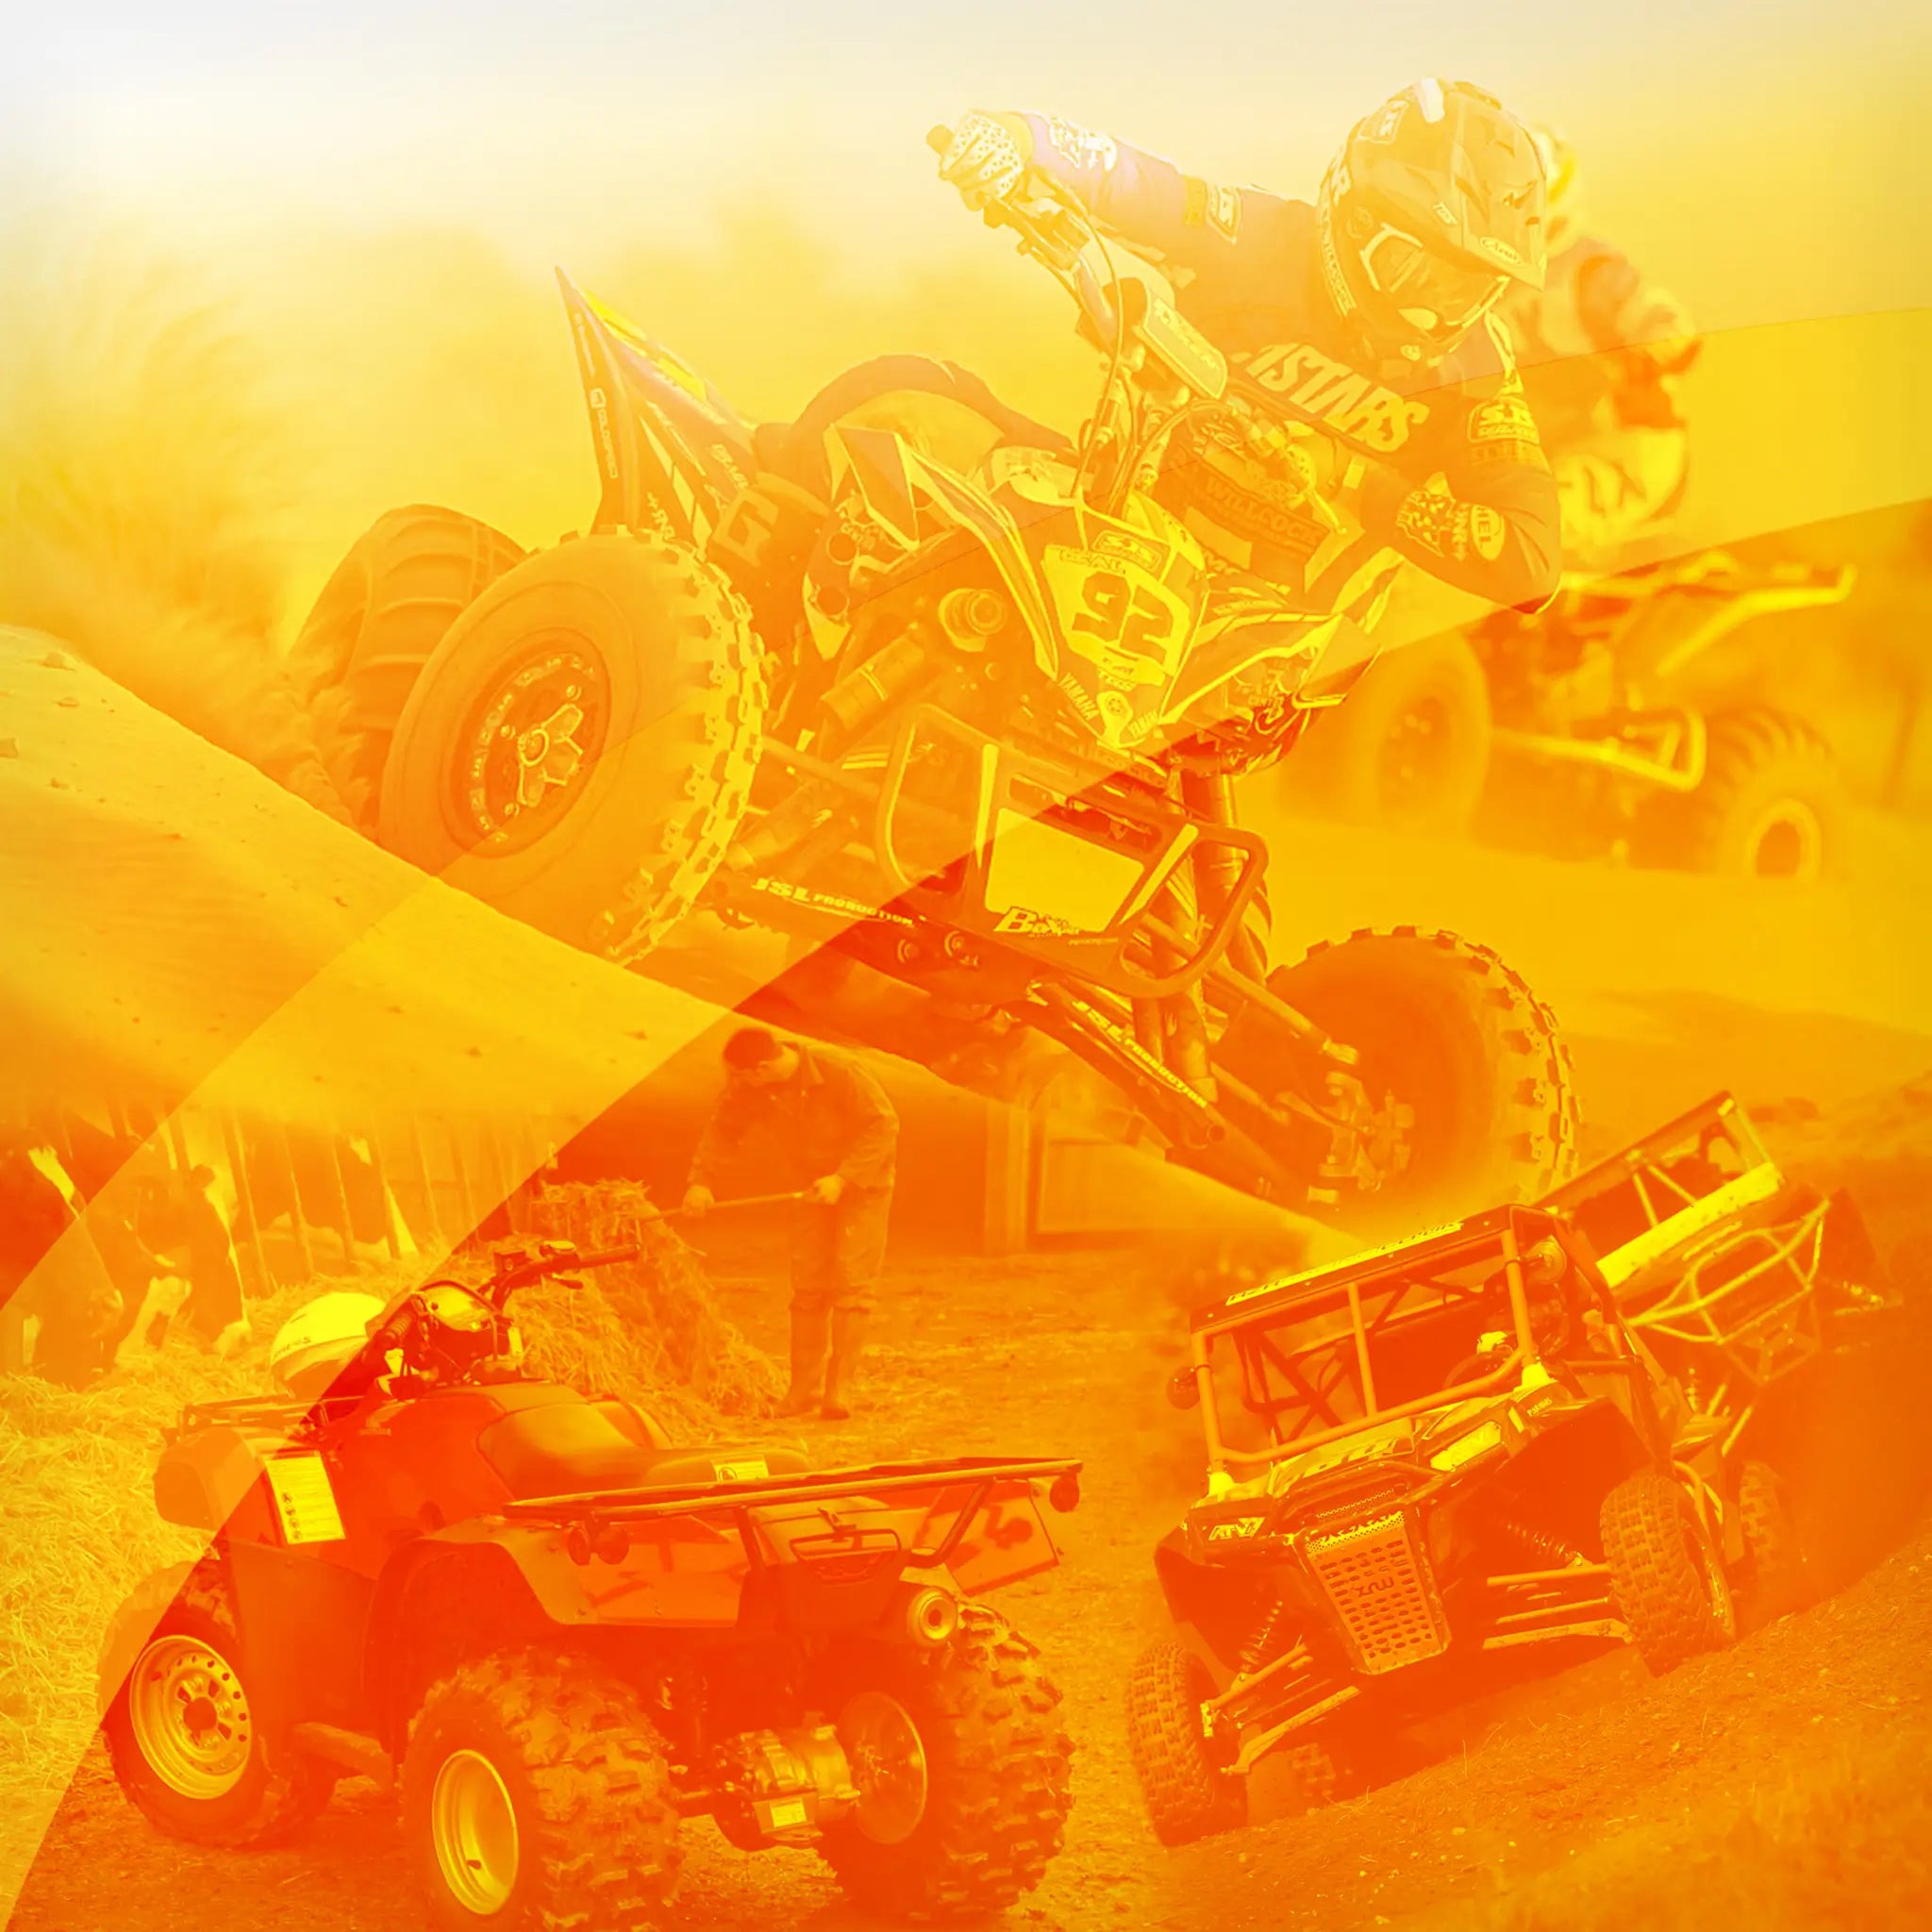 ATVS Only Ltd is the UK's only dedicated Importer and Distributor specializing in parts and accessories for the ATV and Quad bike industry.